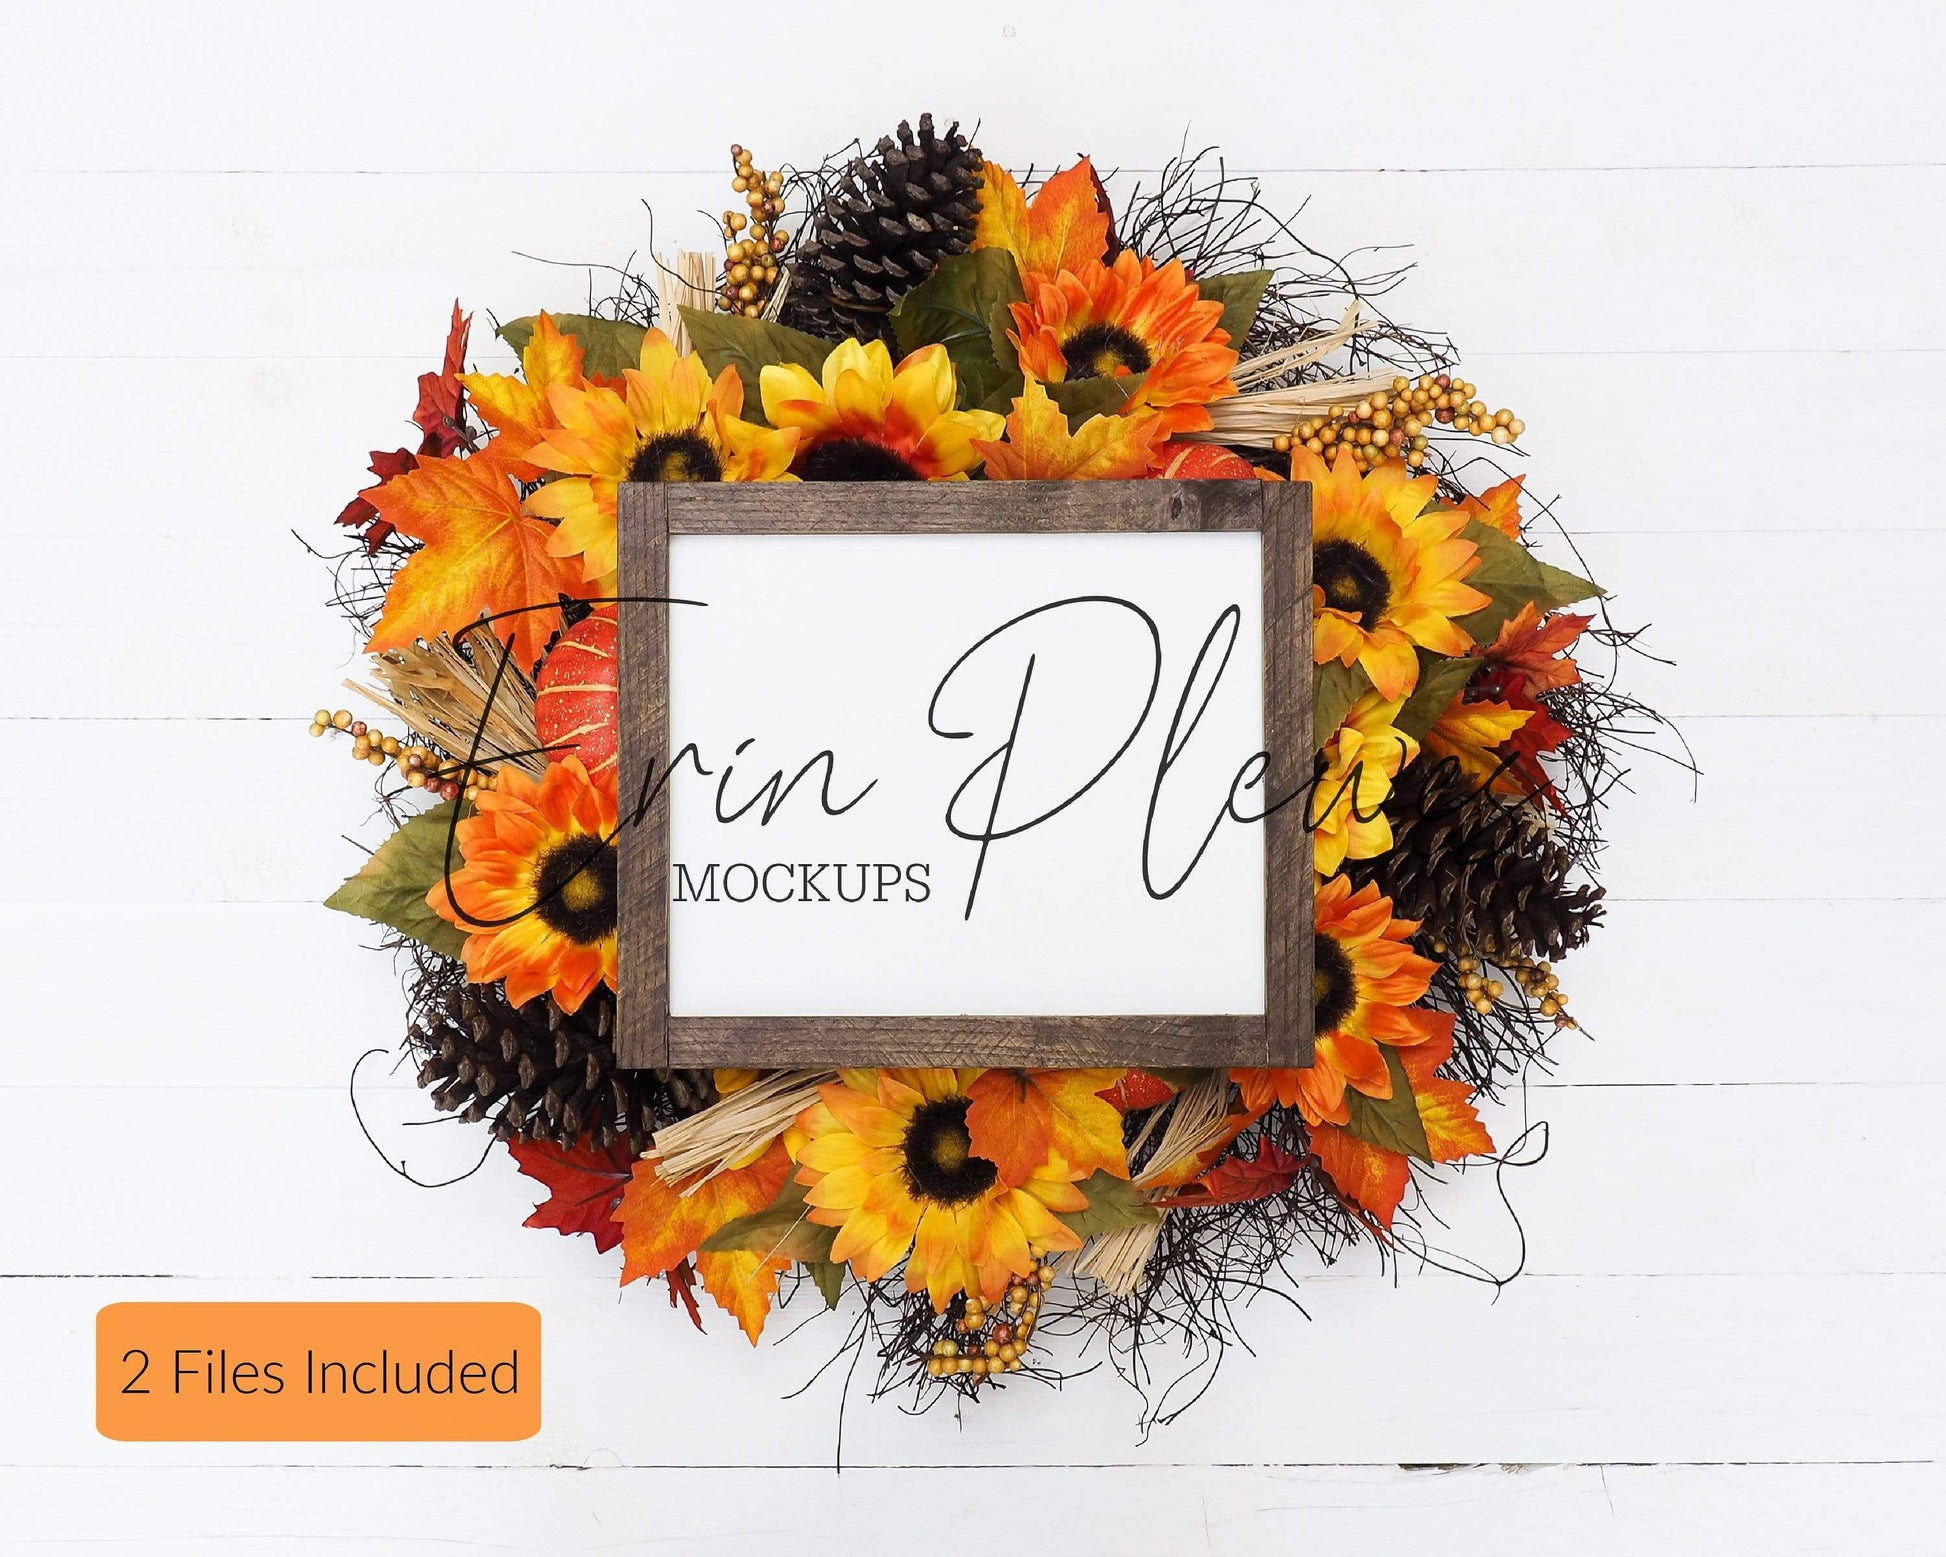 Erin Plewes Mockups Wood Sign Mockup 8x10, Fall Farmhouse Sign Mock Up, Rustic Wood Frame Mock-up, Fall Sign Flatlay with Pumpkins and Sunflowers